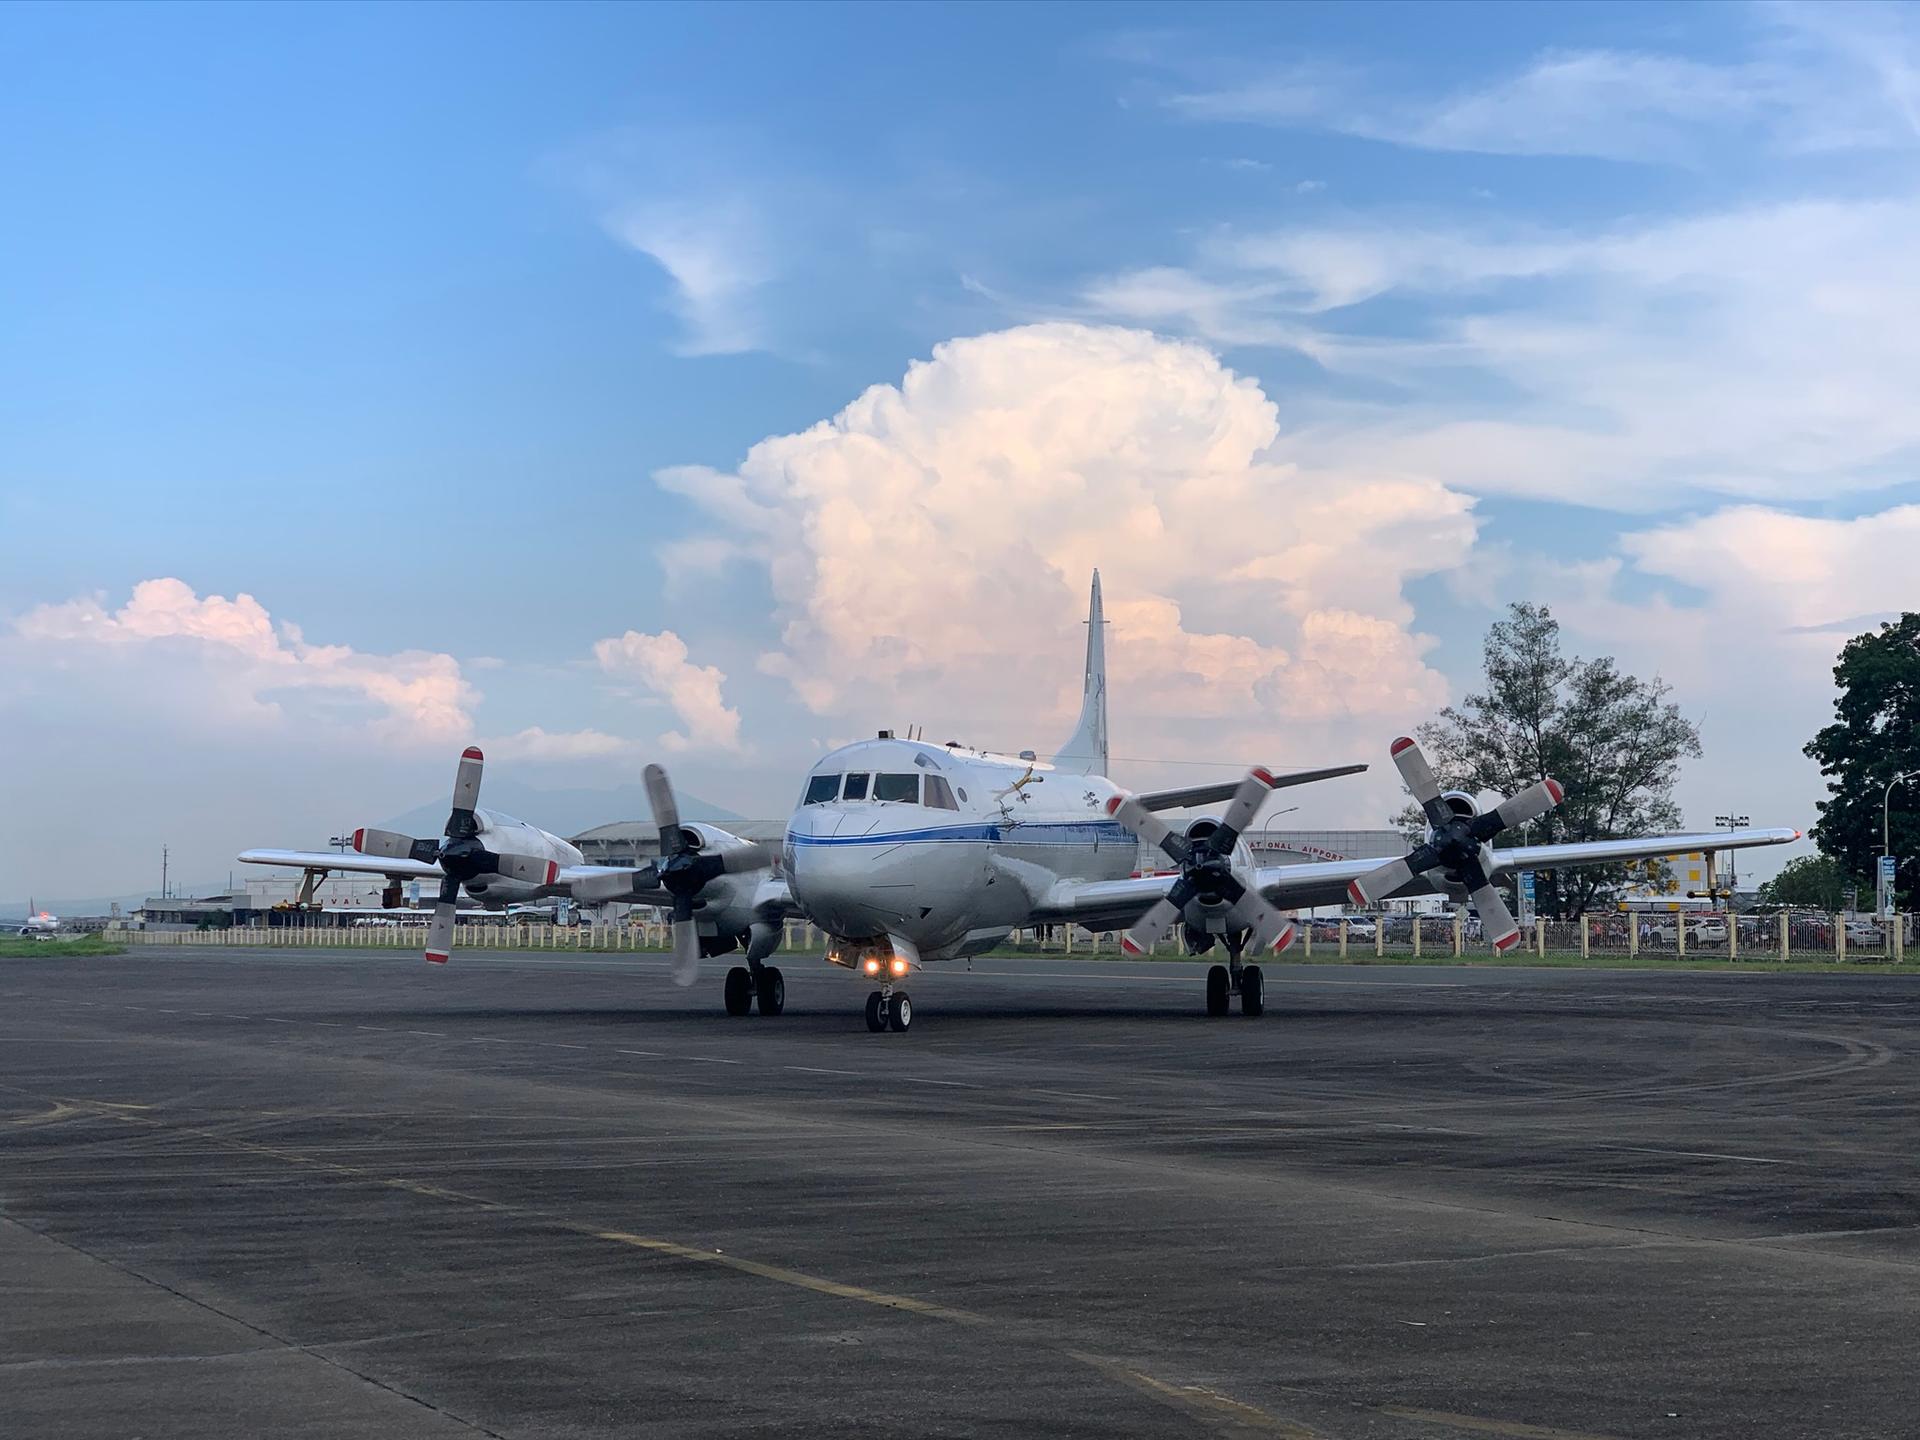 Image of a NASA P-3 Orion aircraft on the tarmac with a large storm in the background.